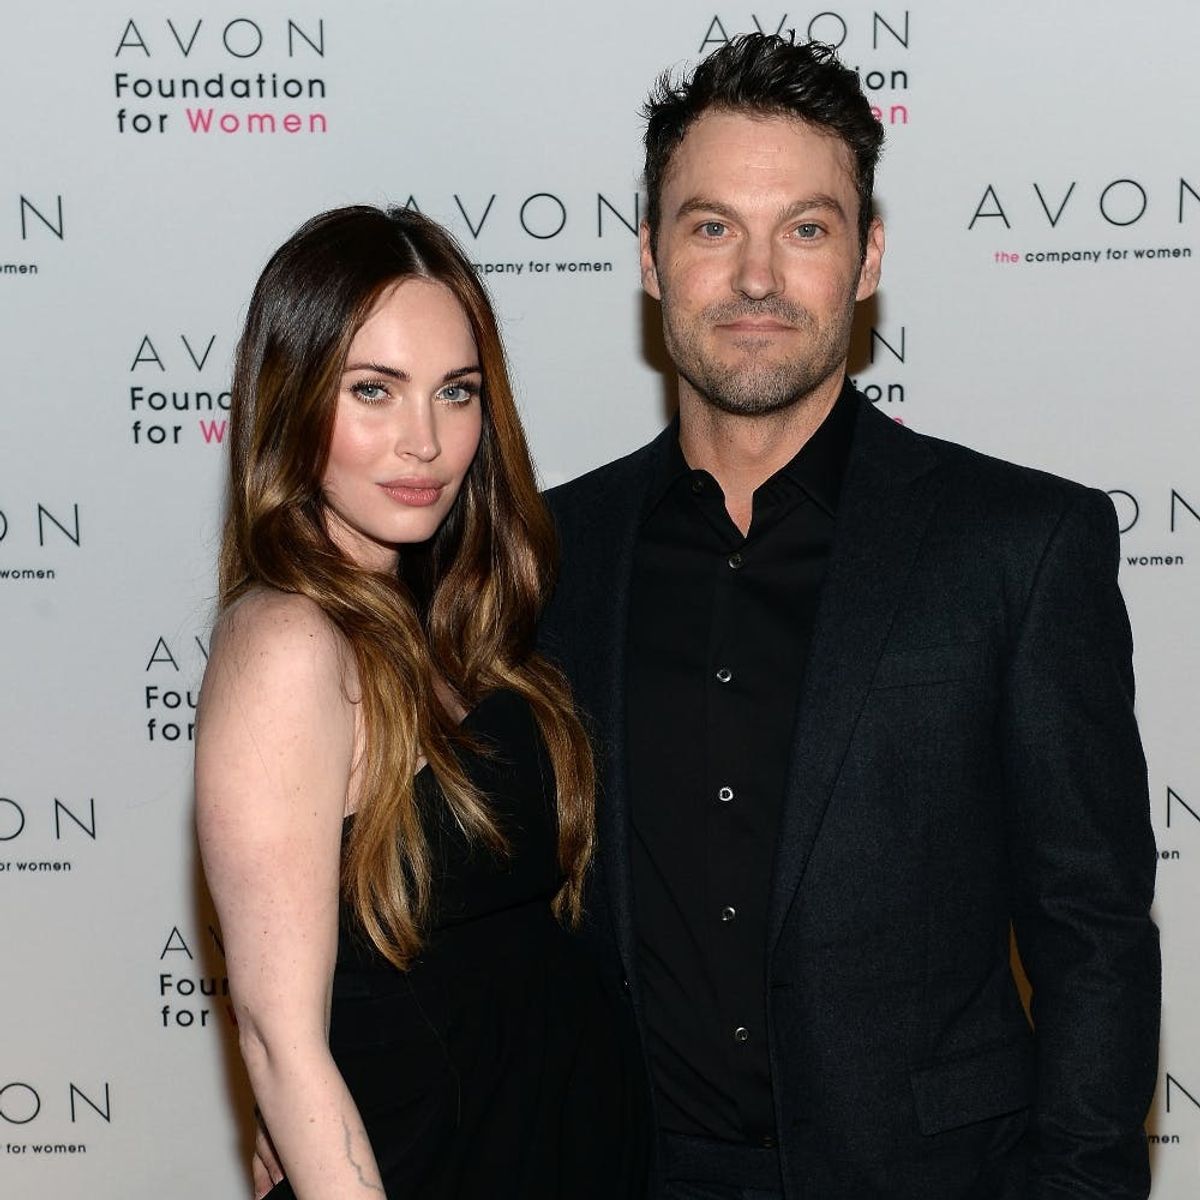 Megan Fox and Brian Austin Green Welcome Baby #3